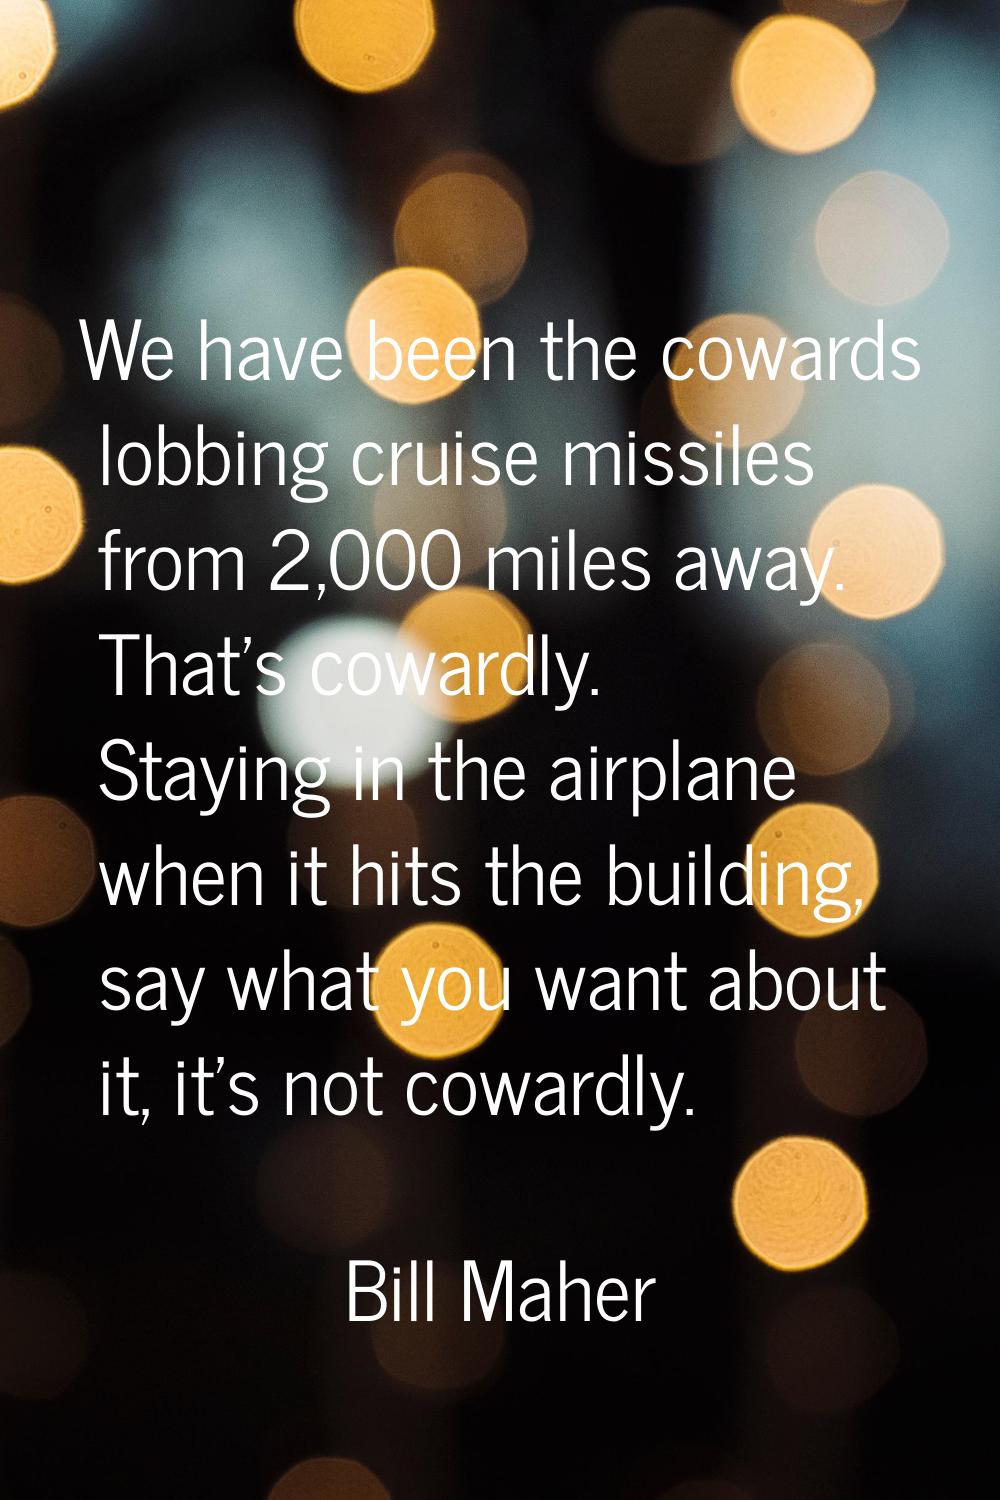 We have been the cowards lobbing cruise missiles from 2,000 miles away. That's cowardly. Staying in